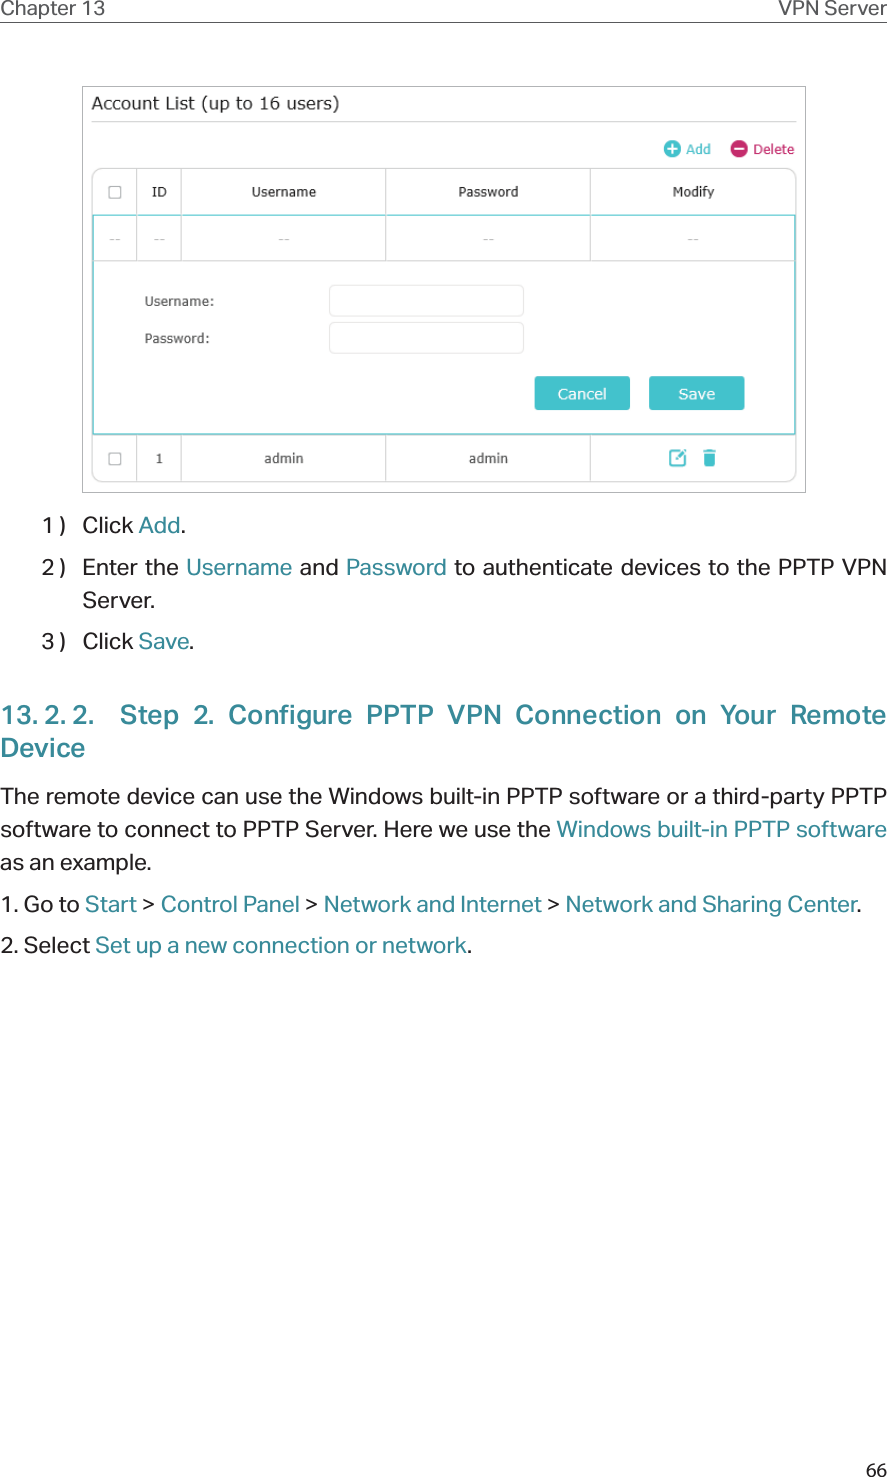 66Chapter 13 VPN Server1 )  Click Add.2 )  Enter the Username and Password to authenticate devices to the PPTP VPN Server.3 )  Click Save.13. 2. 2.  Step 2. Configure PPTP VPN Connection on Your Remote DeviceThe remote device can use the Windows built-in PPTP software or a third-party PPTP software to connect to PPTP Server. Here we use the Windows built-in PPTP software as an example.1. Go to Start &gt; Control Panel &gt; Network and Internet &gt; Network and Sharing Center.2. Select Set up a new connection or network.